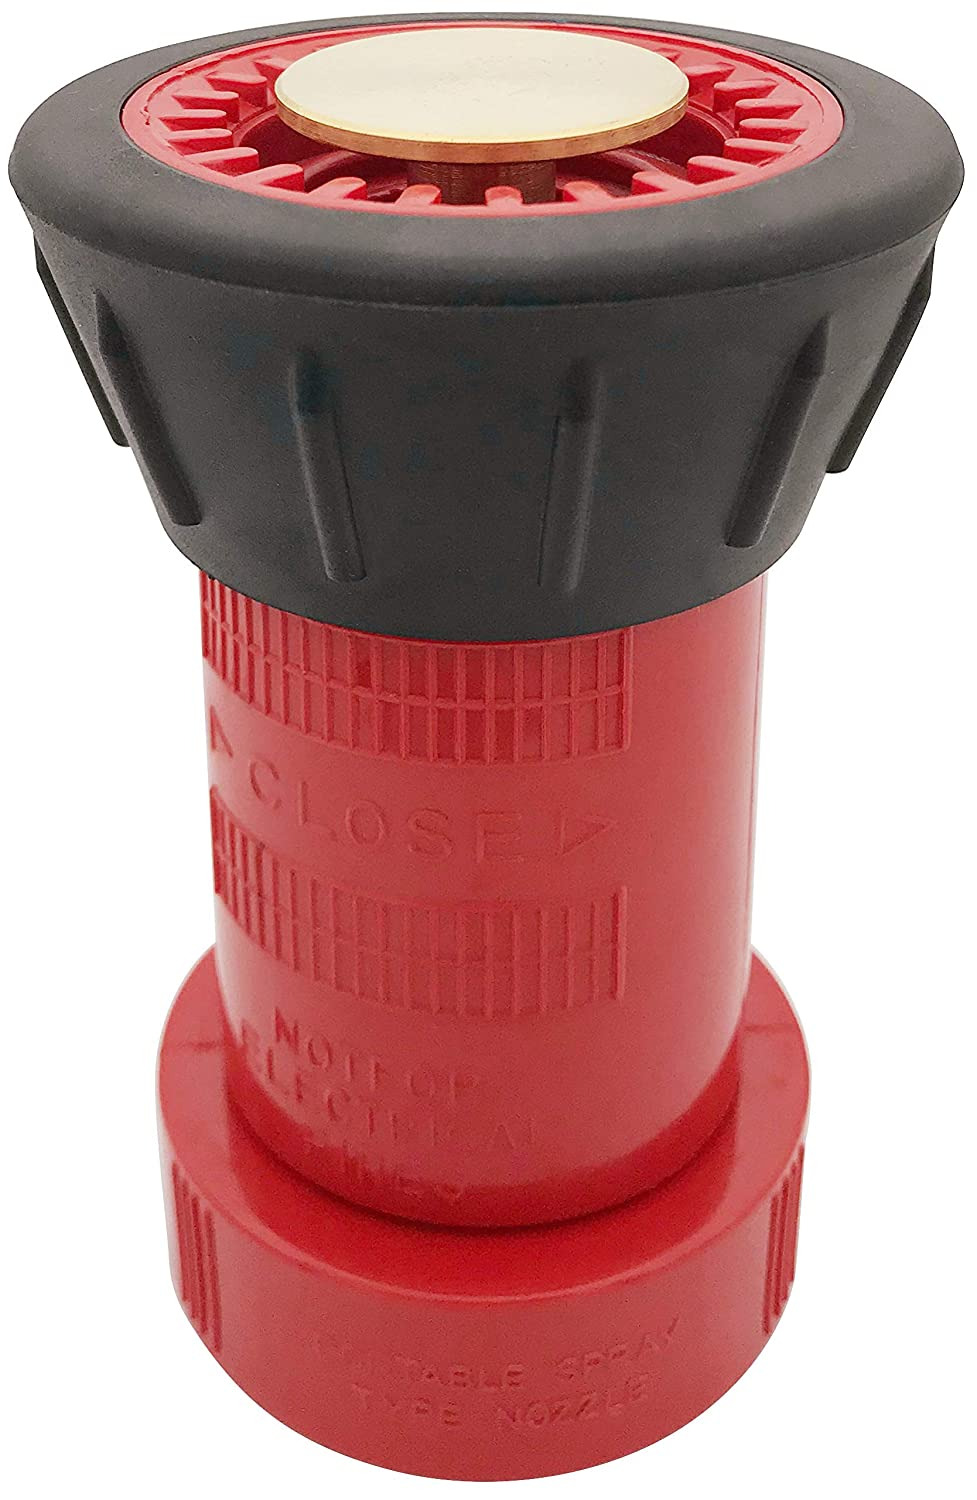 Rosyocean Fire Hose Nozzle 1-1/2 Inch NST/NH Thermoplastic Fire Equipment Indust